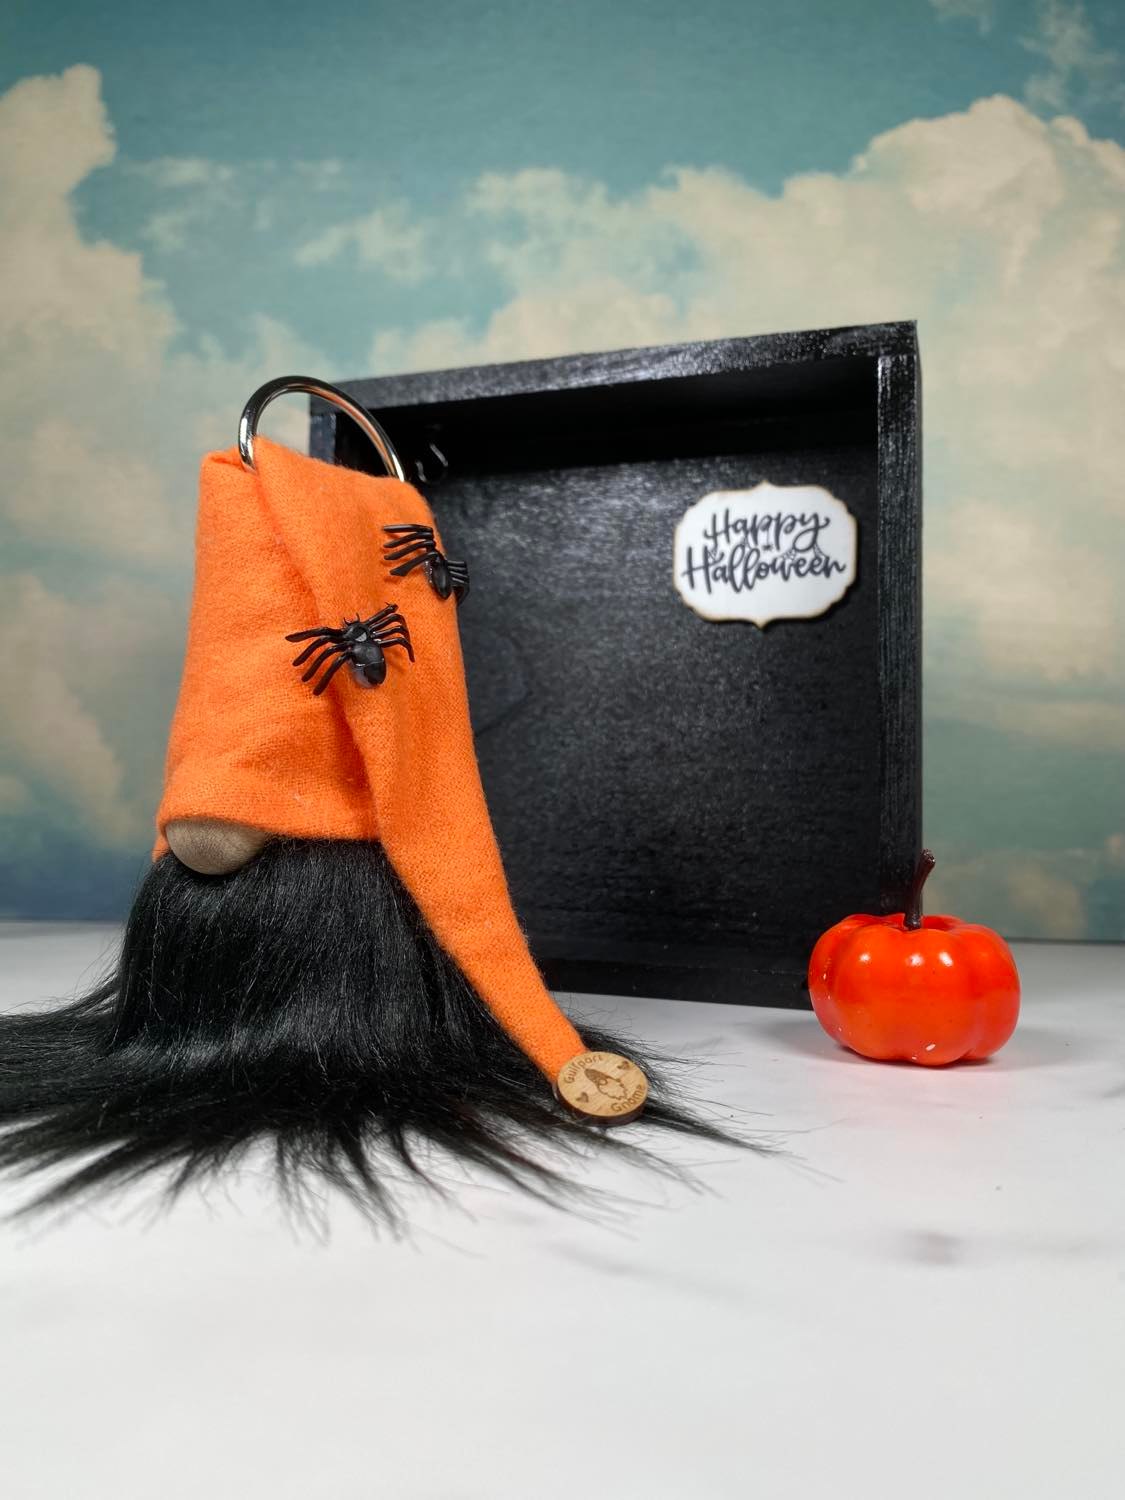 Gift Set - Happy Halloween Orange and Black Gnome and Spiders Gift set with pumpkin and 4" Plush Gnome